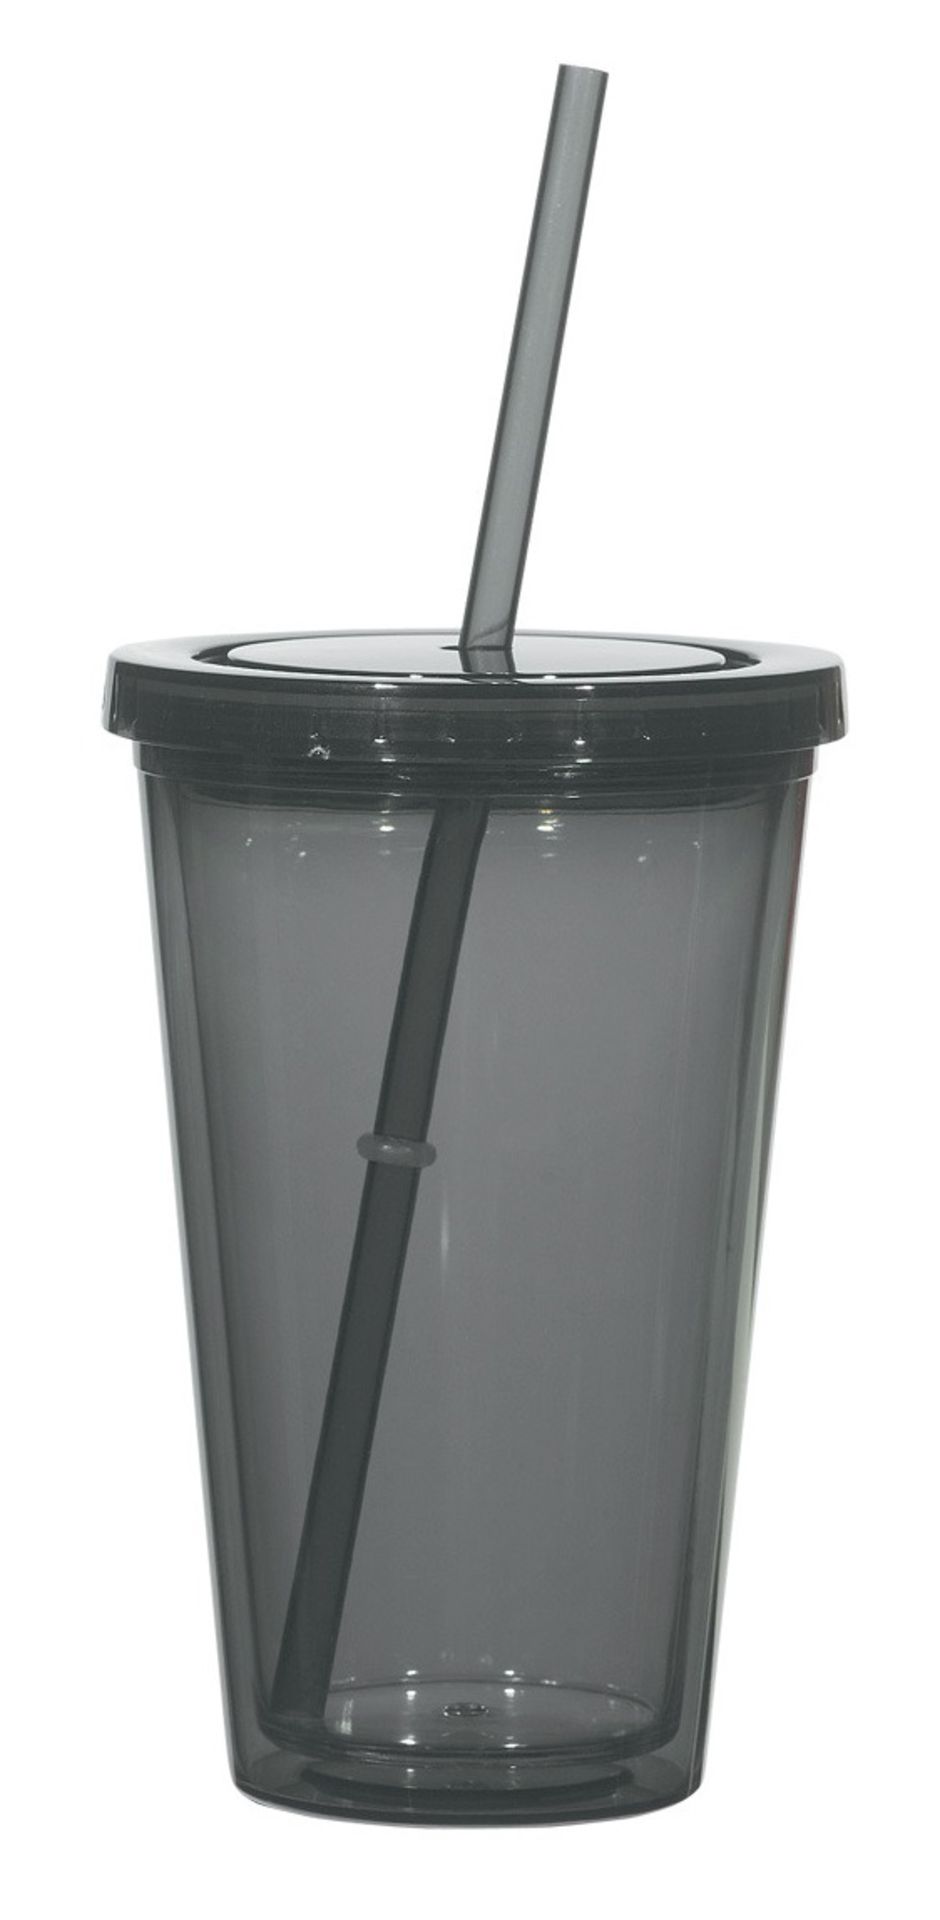 25 x Festival Tumbles - Colour Black - New Orleans Acrylic With a 16oz Capacity and Double Wall